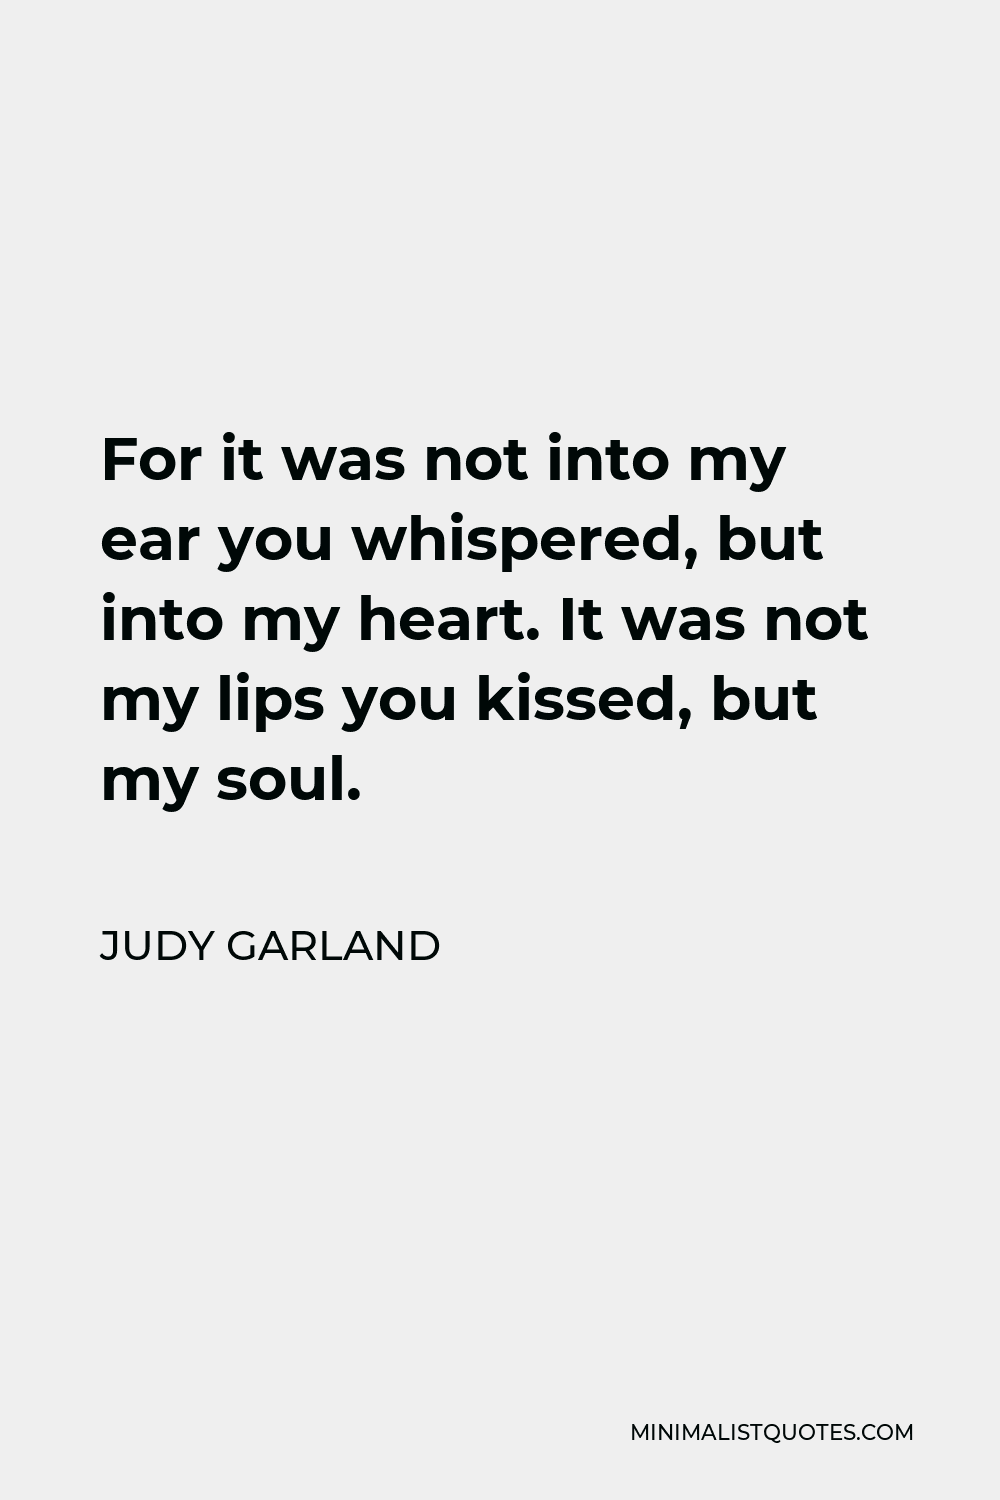 Judy Garland Quote - For it was not into my ear you whispered, but into my heart. It was not my lips you kissed, but my soul.